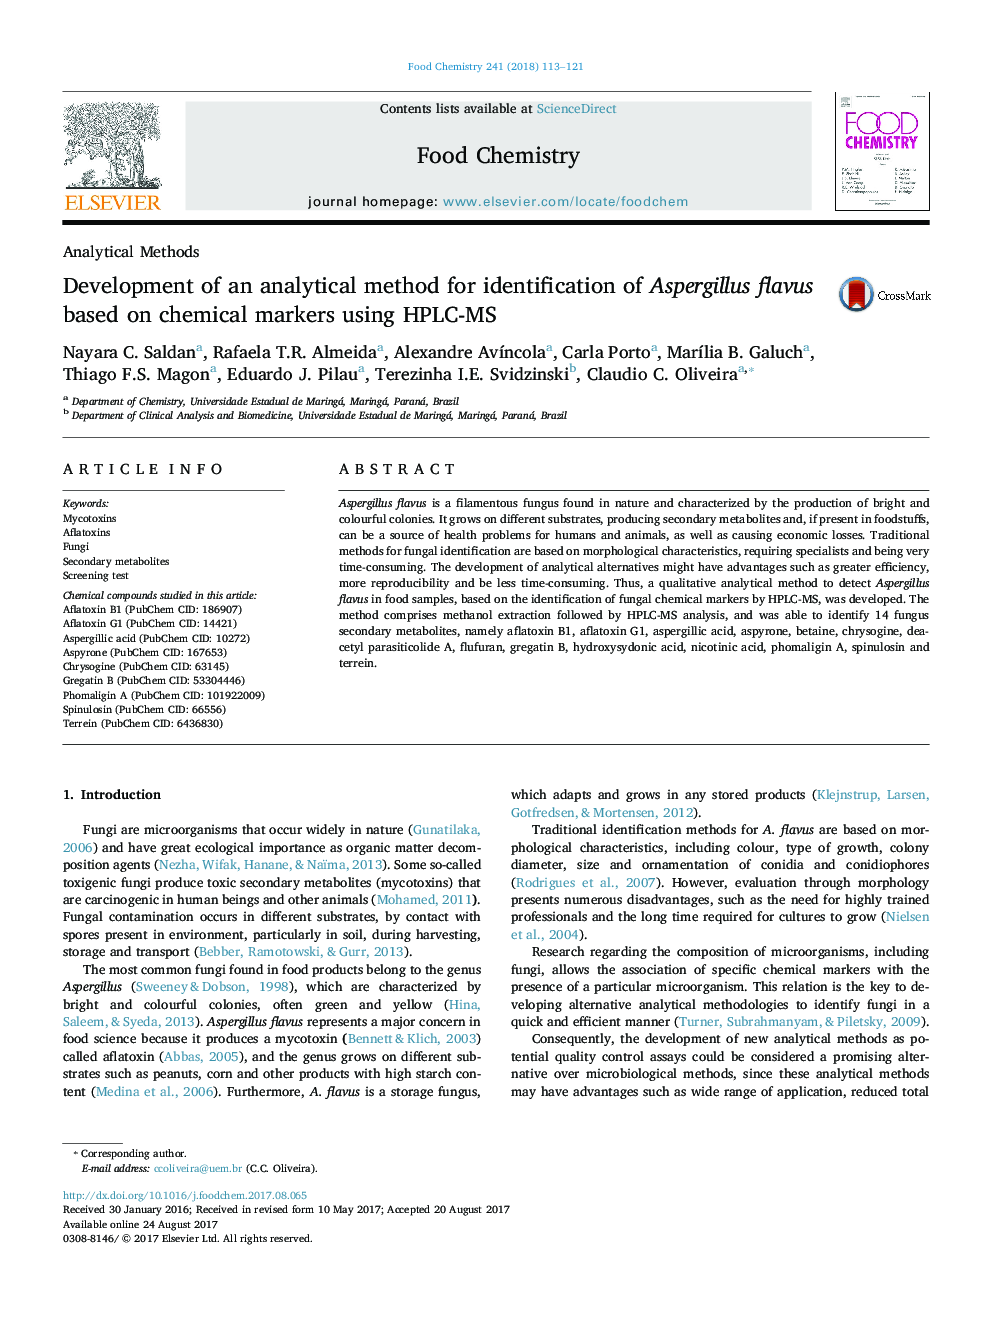 Development of an analytical method for identification of Aspergillus flavus based on chemical markers using HPLC-MS